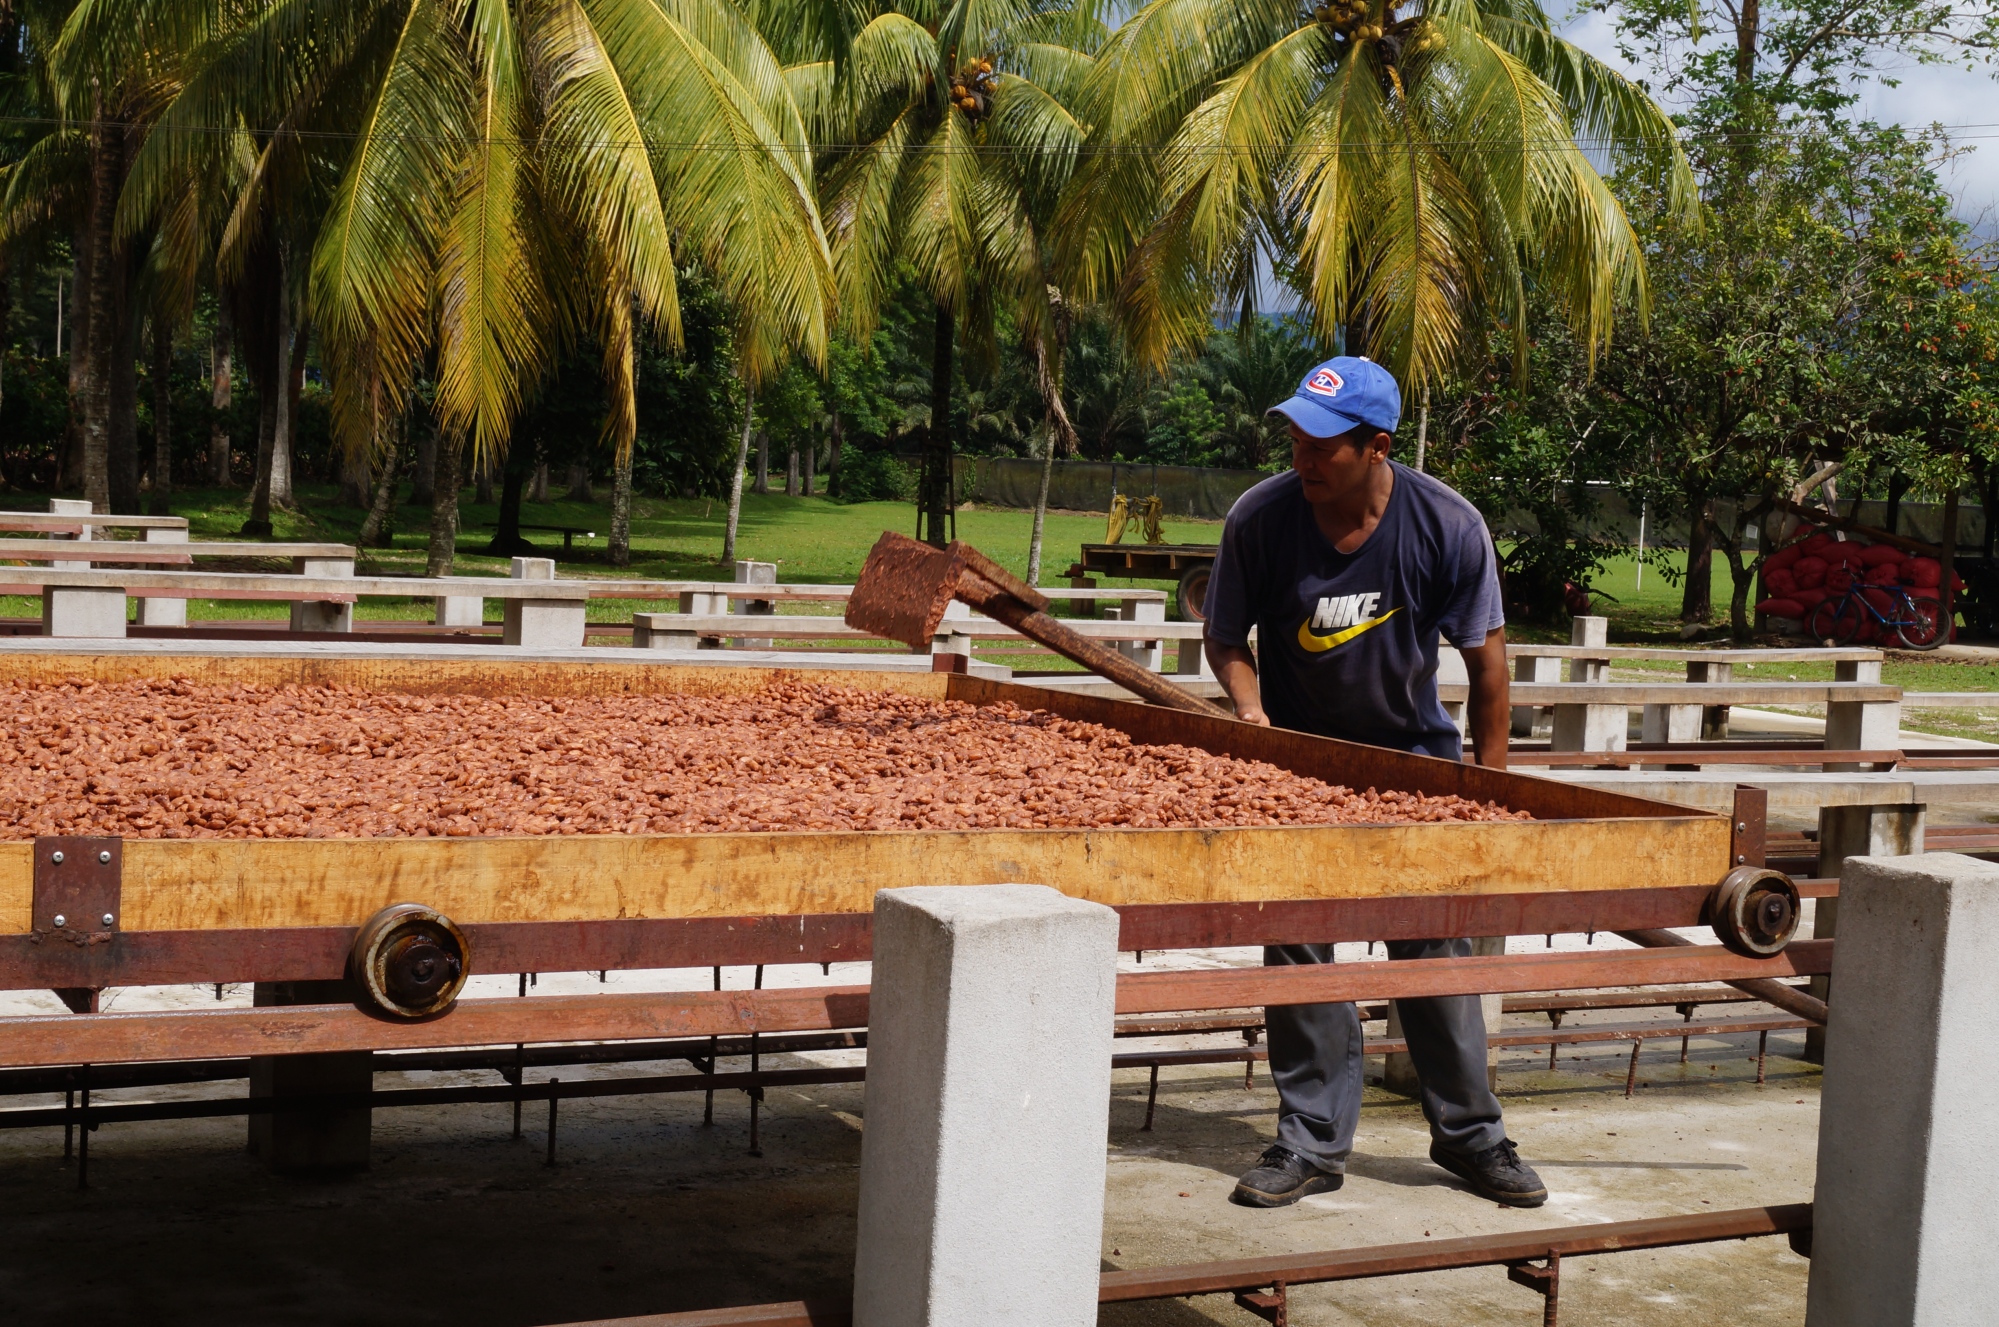 Drying cacao